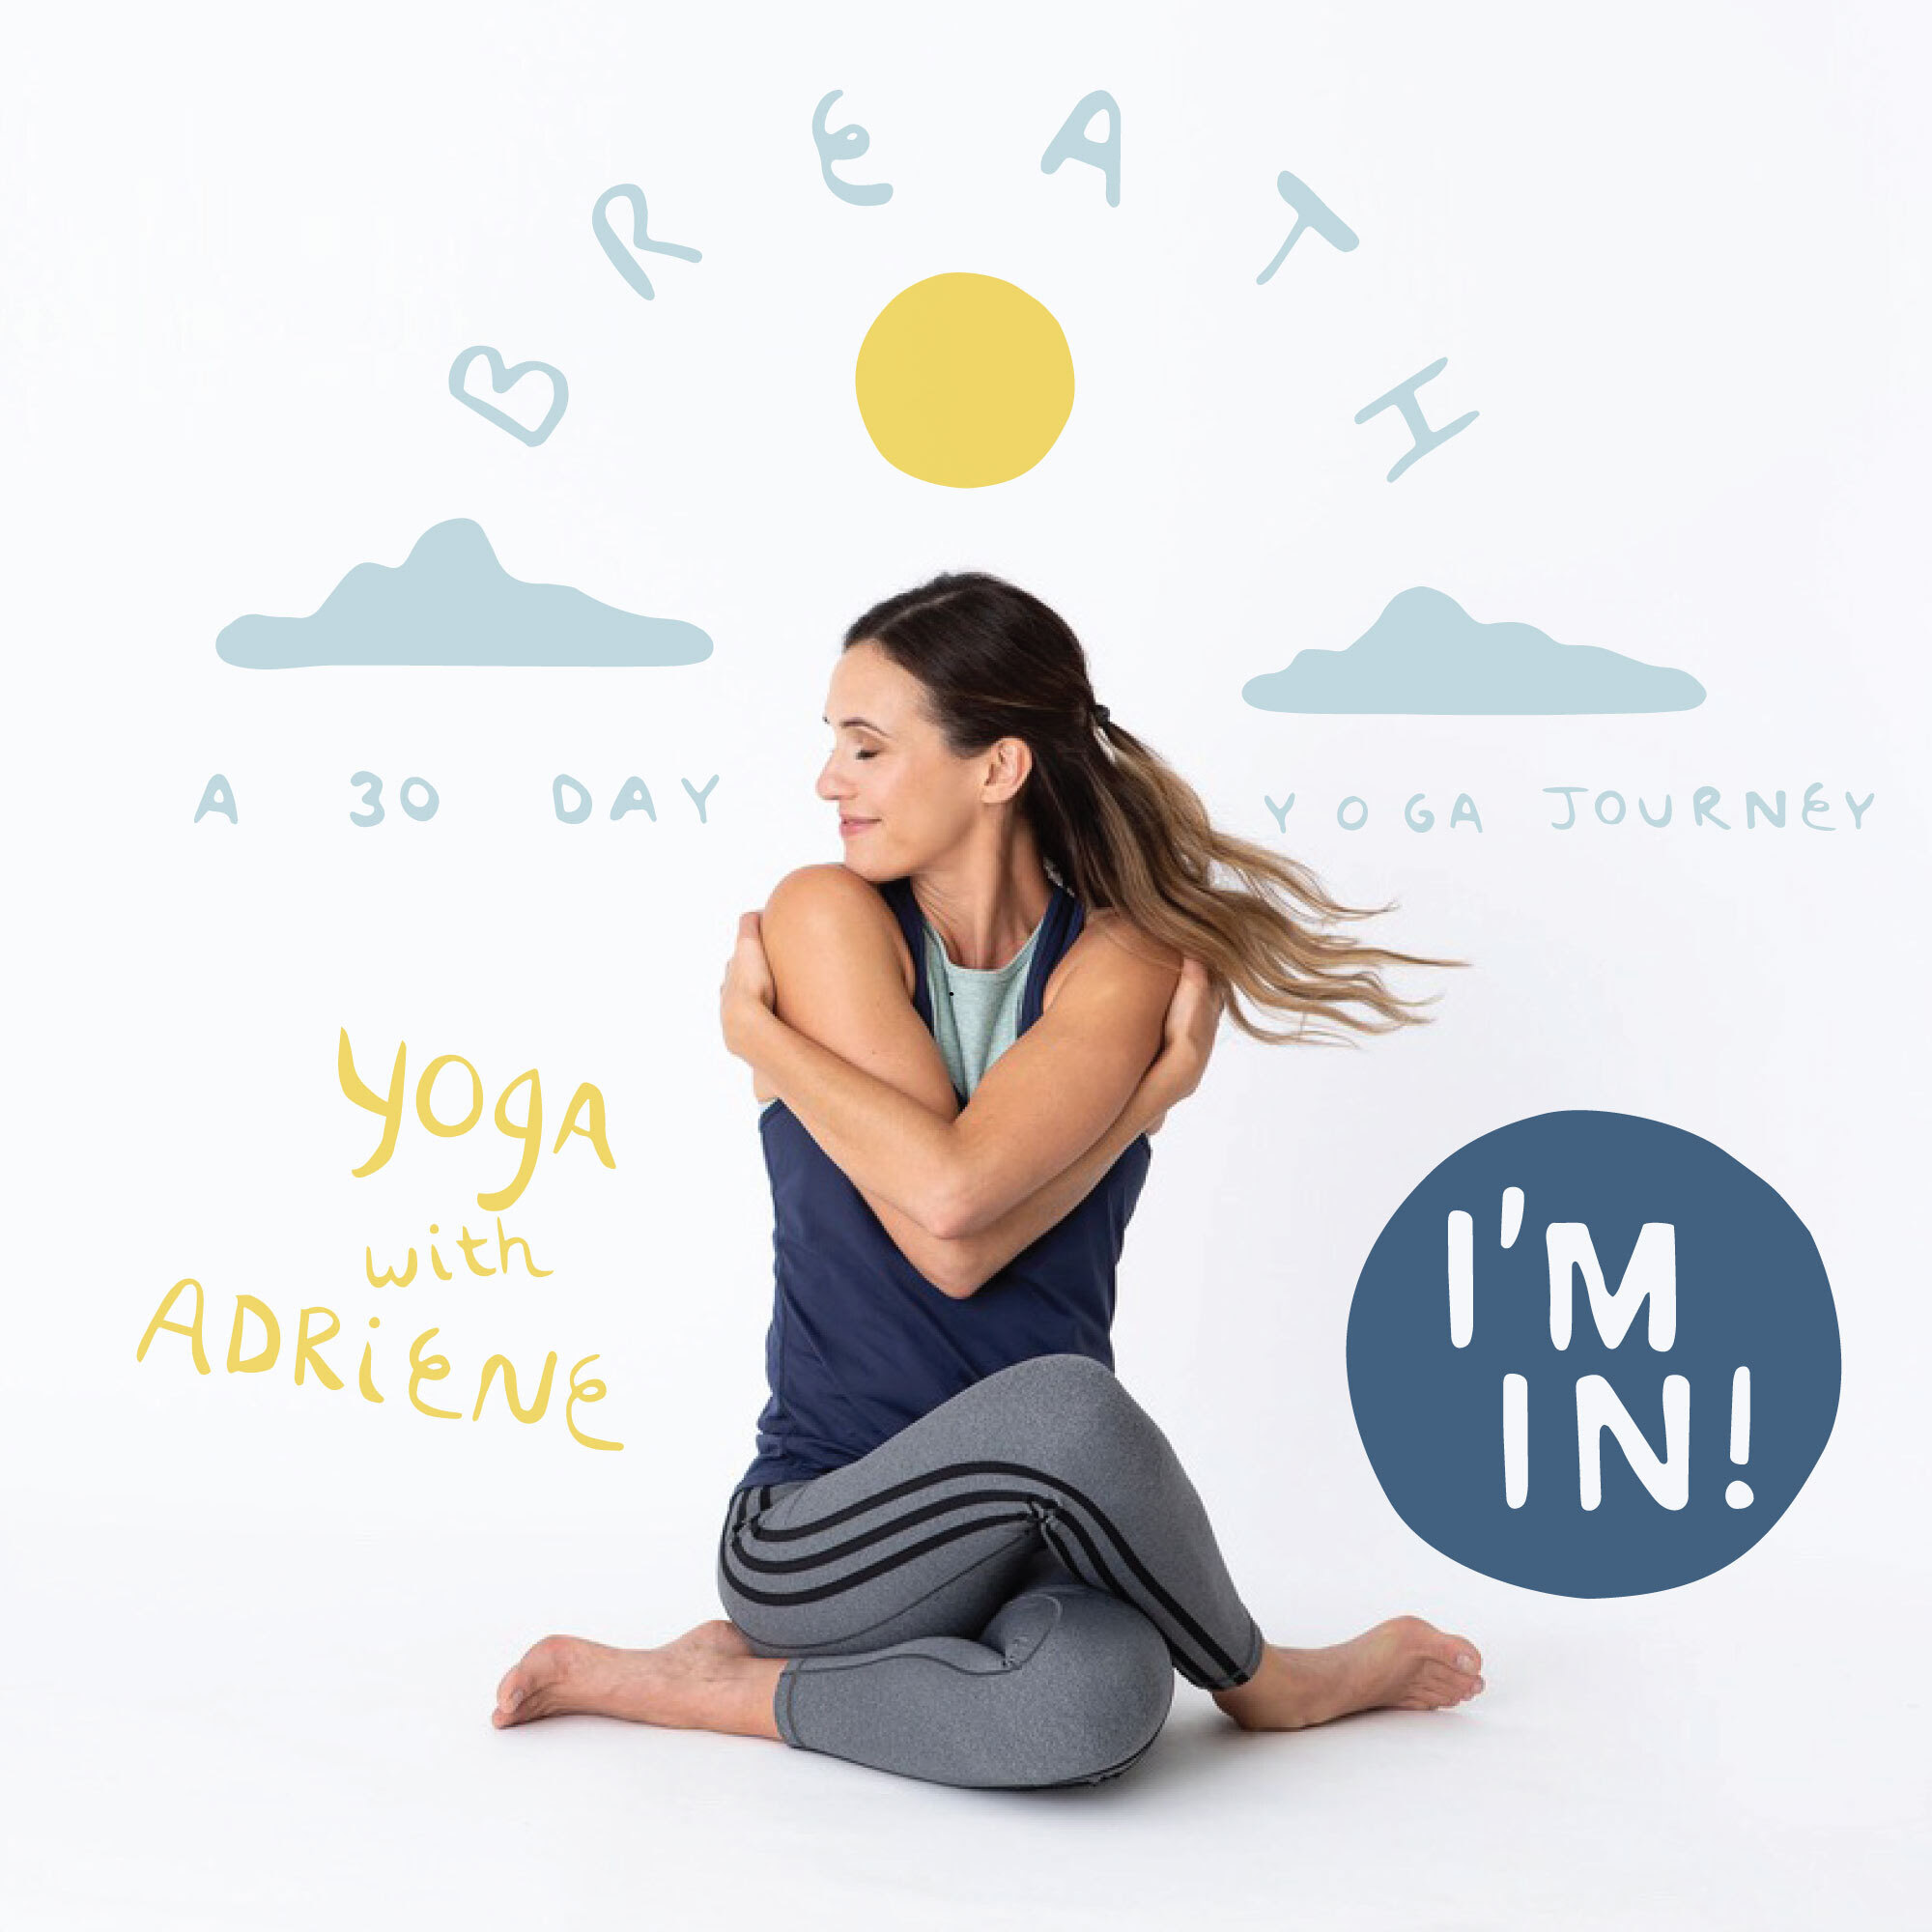 Breath—a new 30 day Journey with Yoga with Adriene